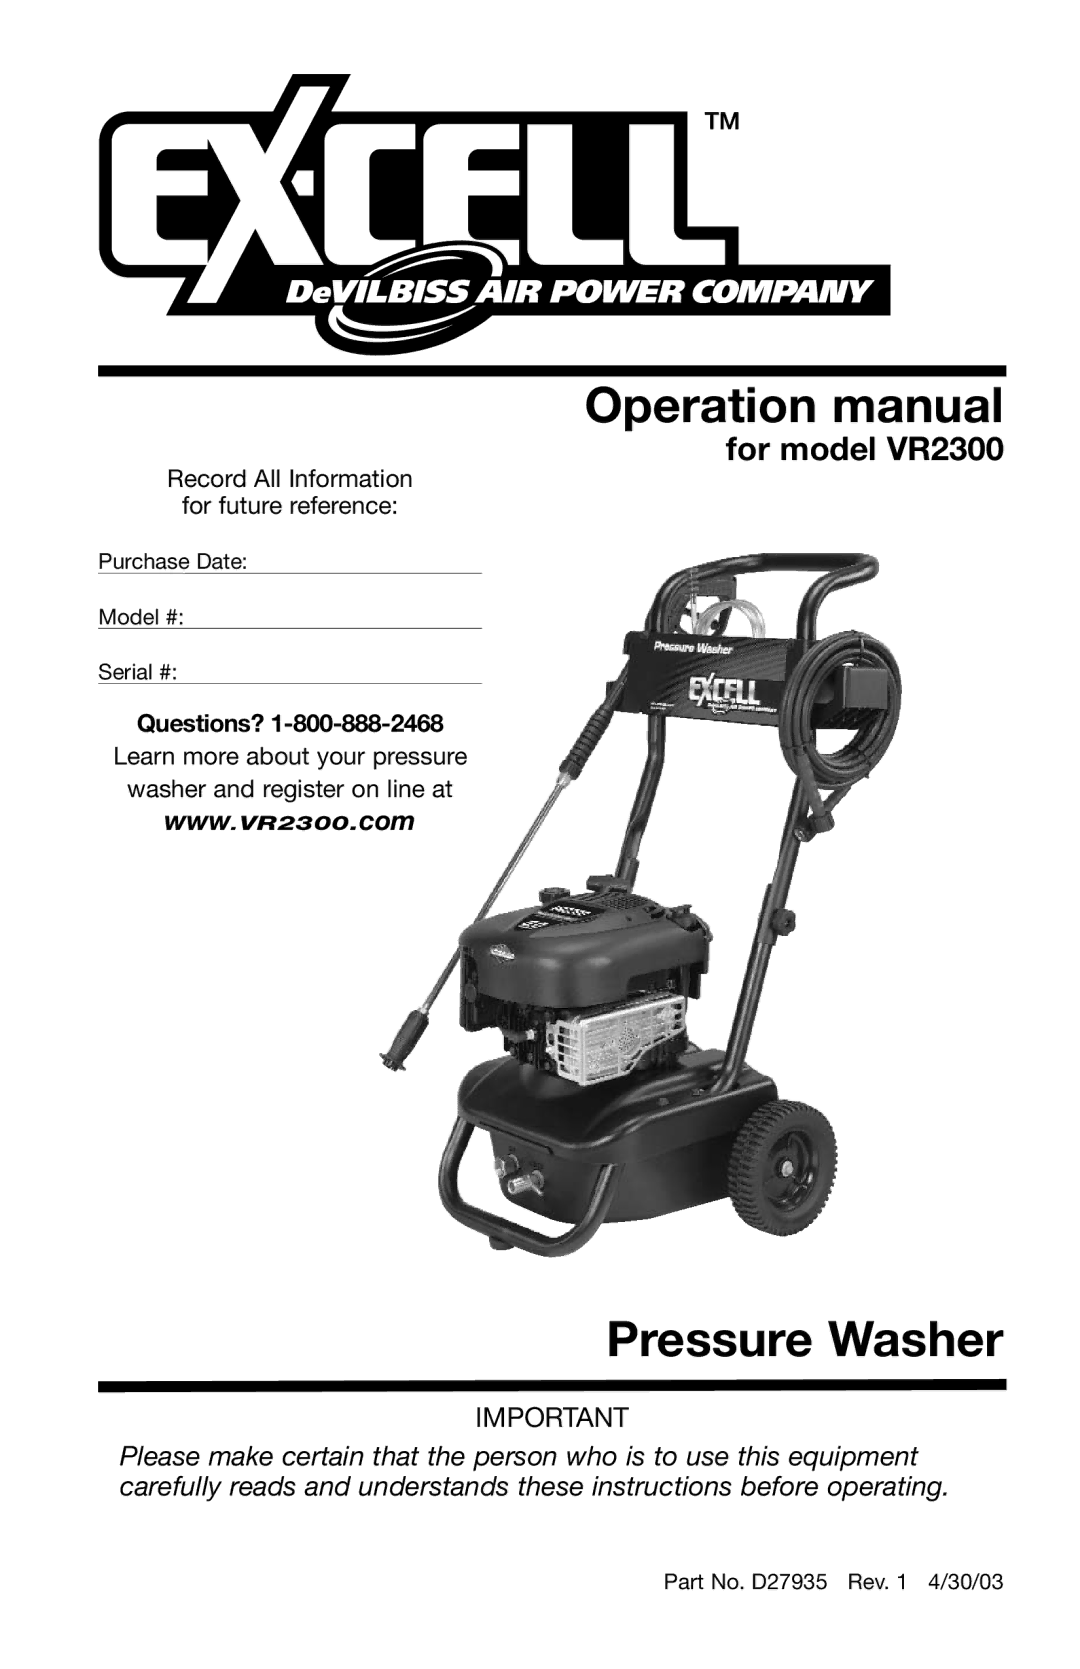 Excell Precision VR2300 operation manual Pressure Washer 